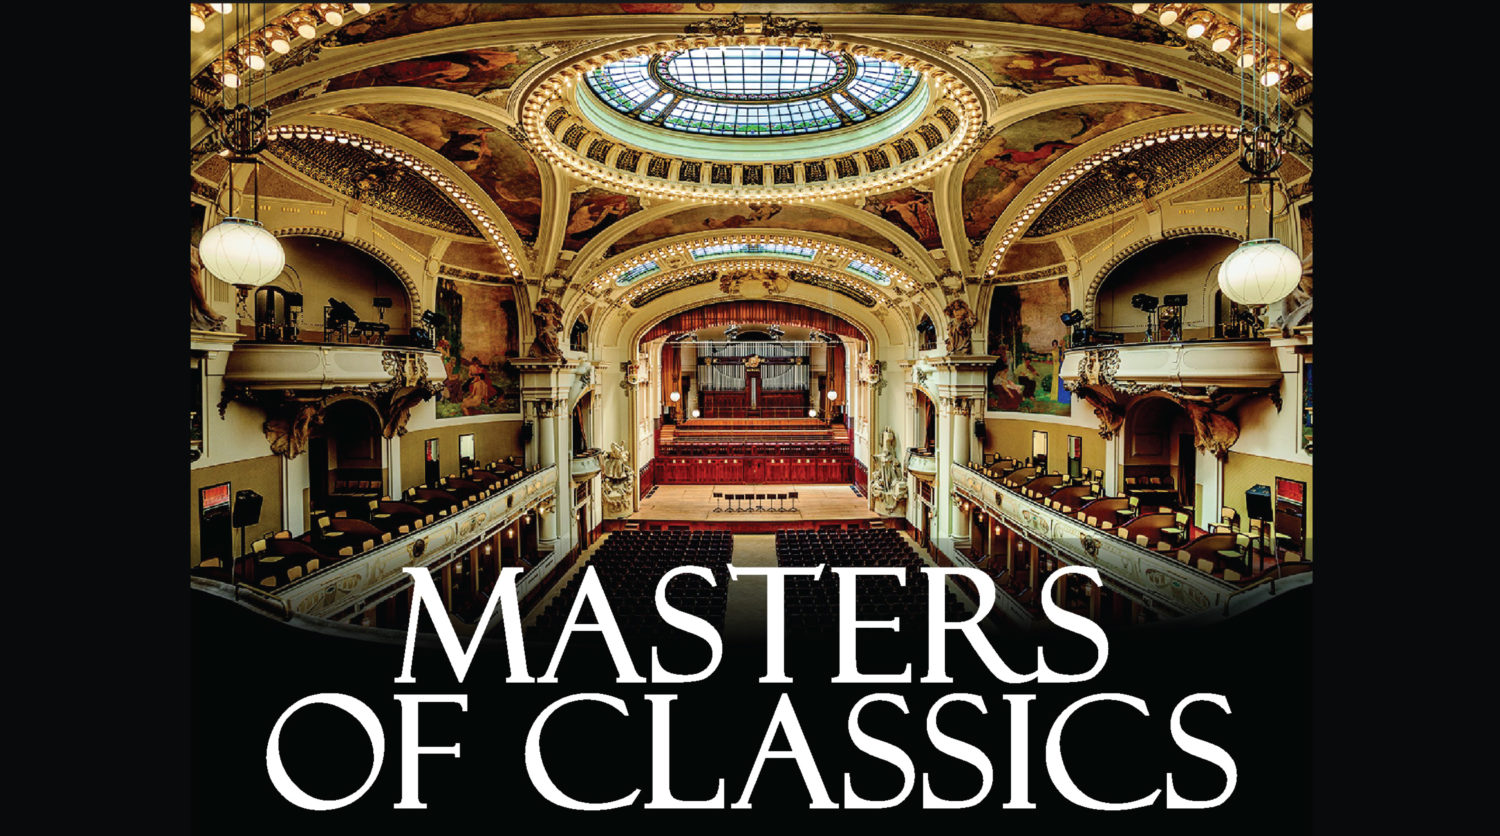 MASTERS OF CLASSICS IN THE MUNICIPAL HOUSE 16.06.2020 - přesun na 11.08.2020